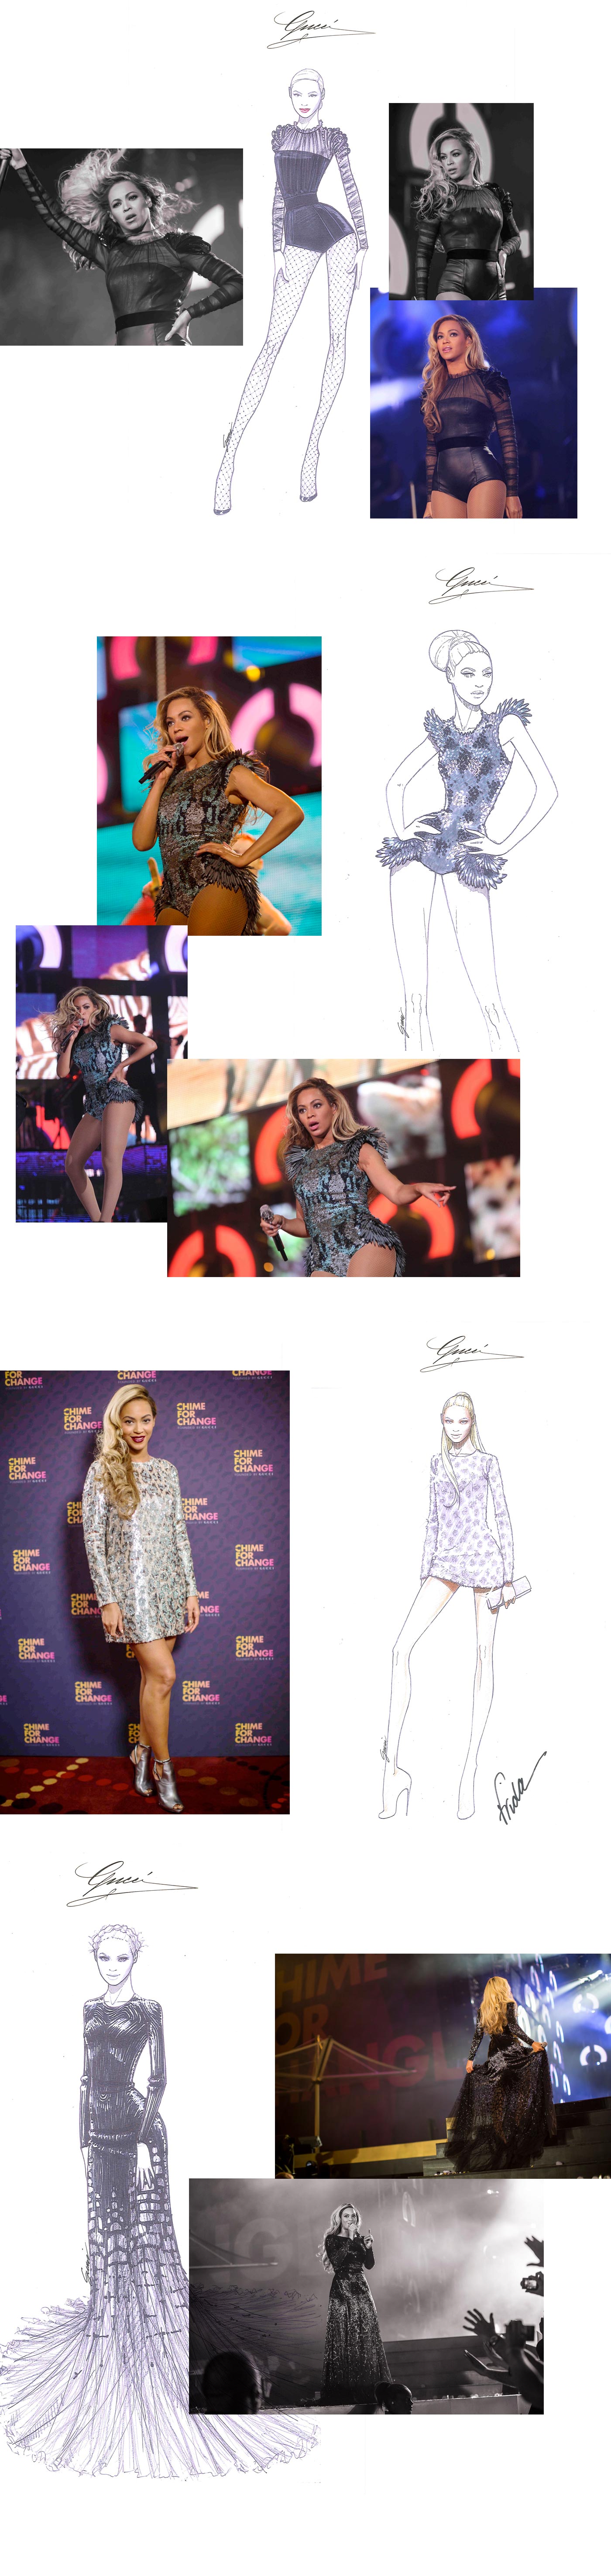 Beyonce-Gucci-Looks-for mrs Carter-world tour-1